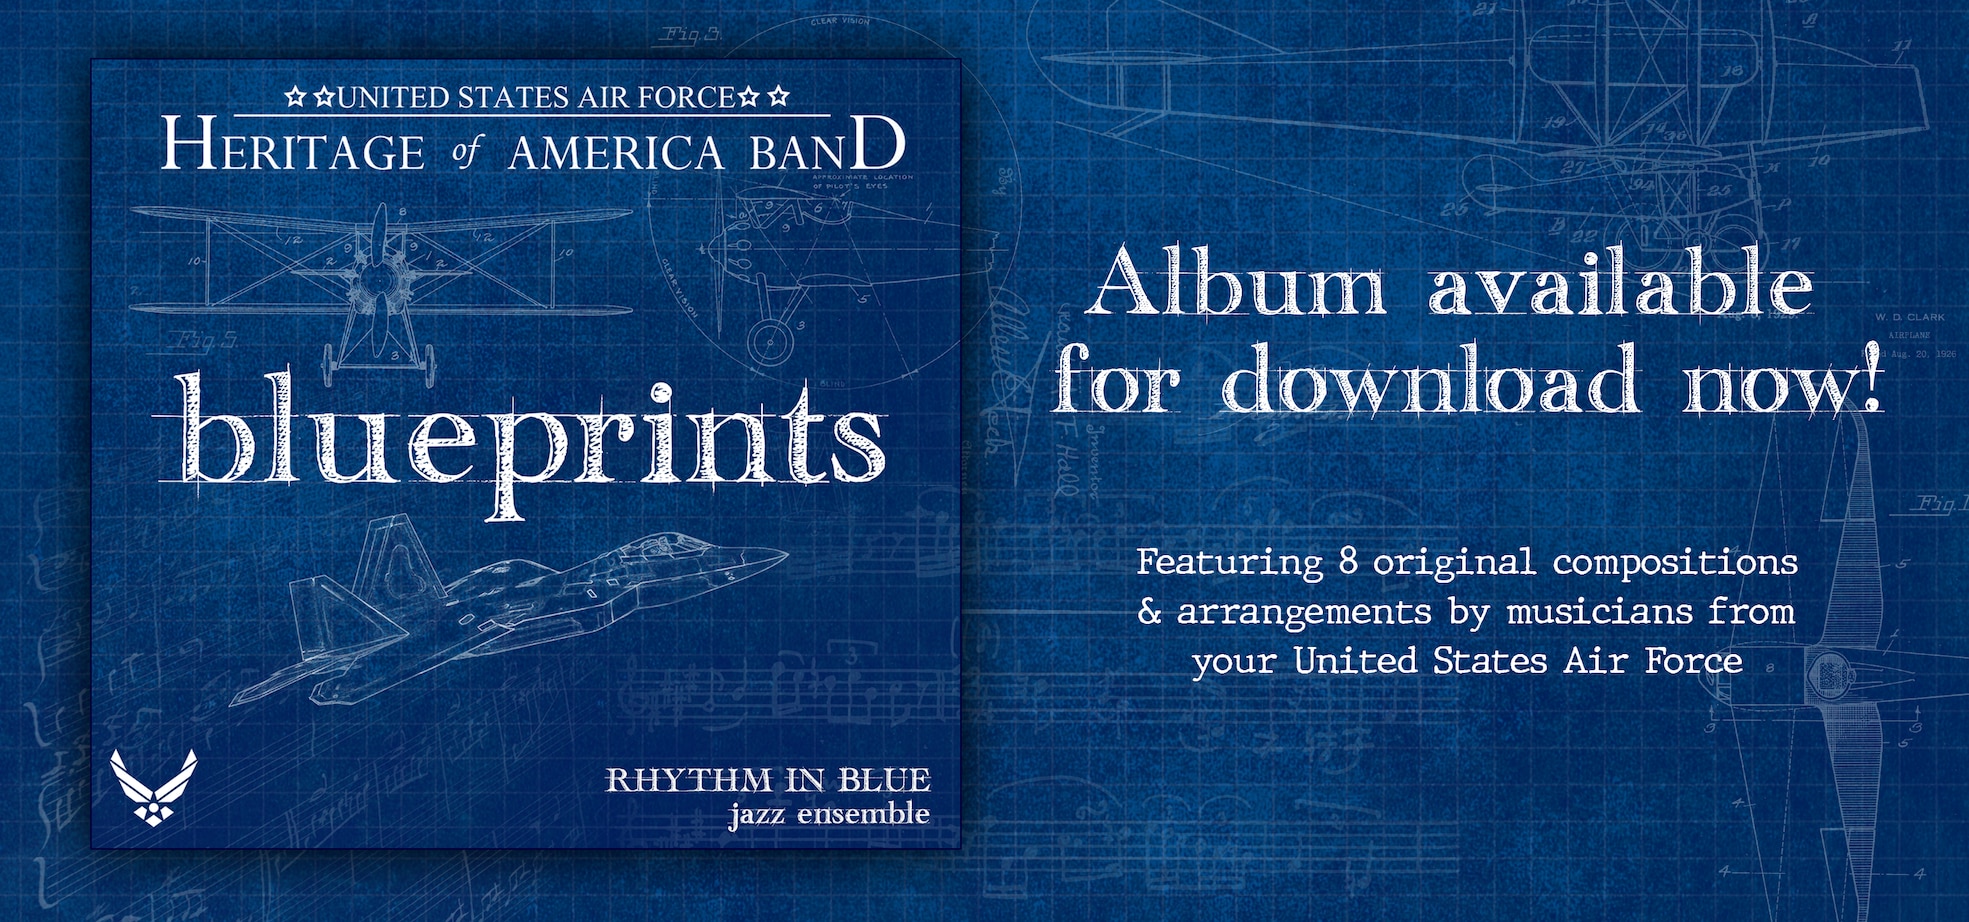 Rhythm in Blue's newest album Blueprints is available for download